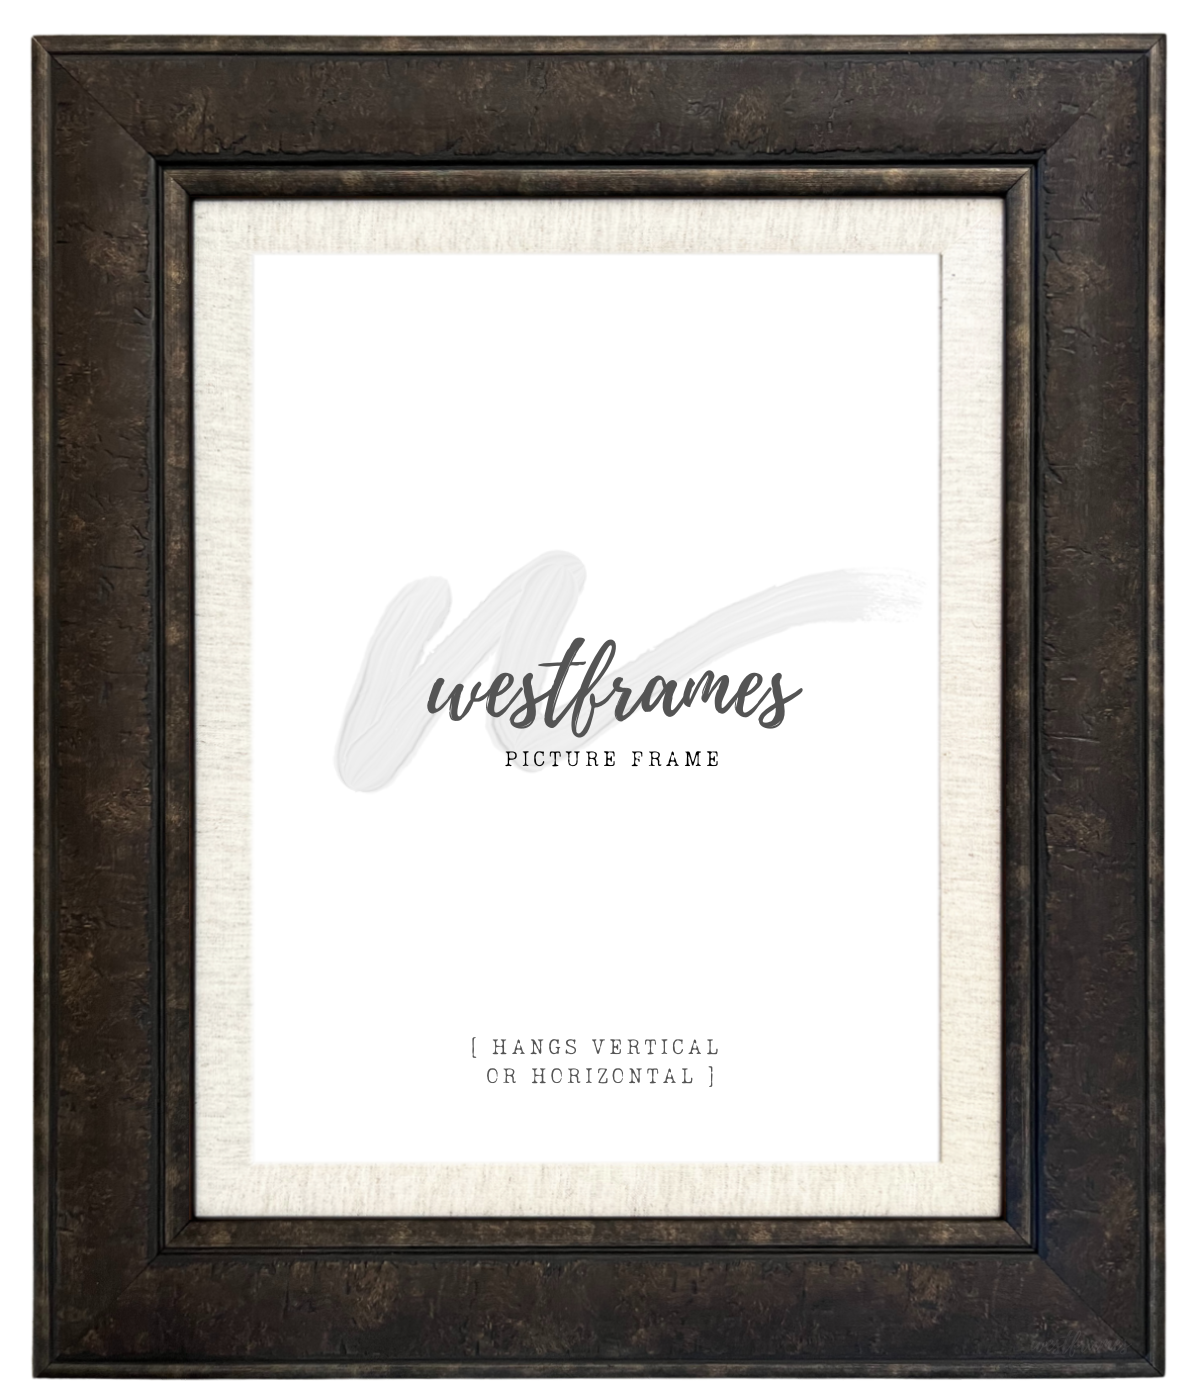 Marcello Rustic Distressed Dark Charcoal Brown with Linen Liner Wall Picture Frame - West Frames